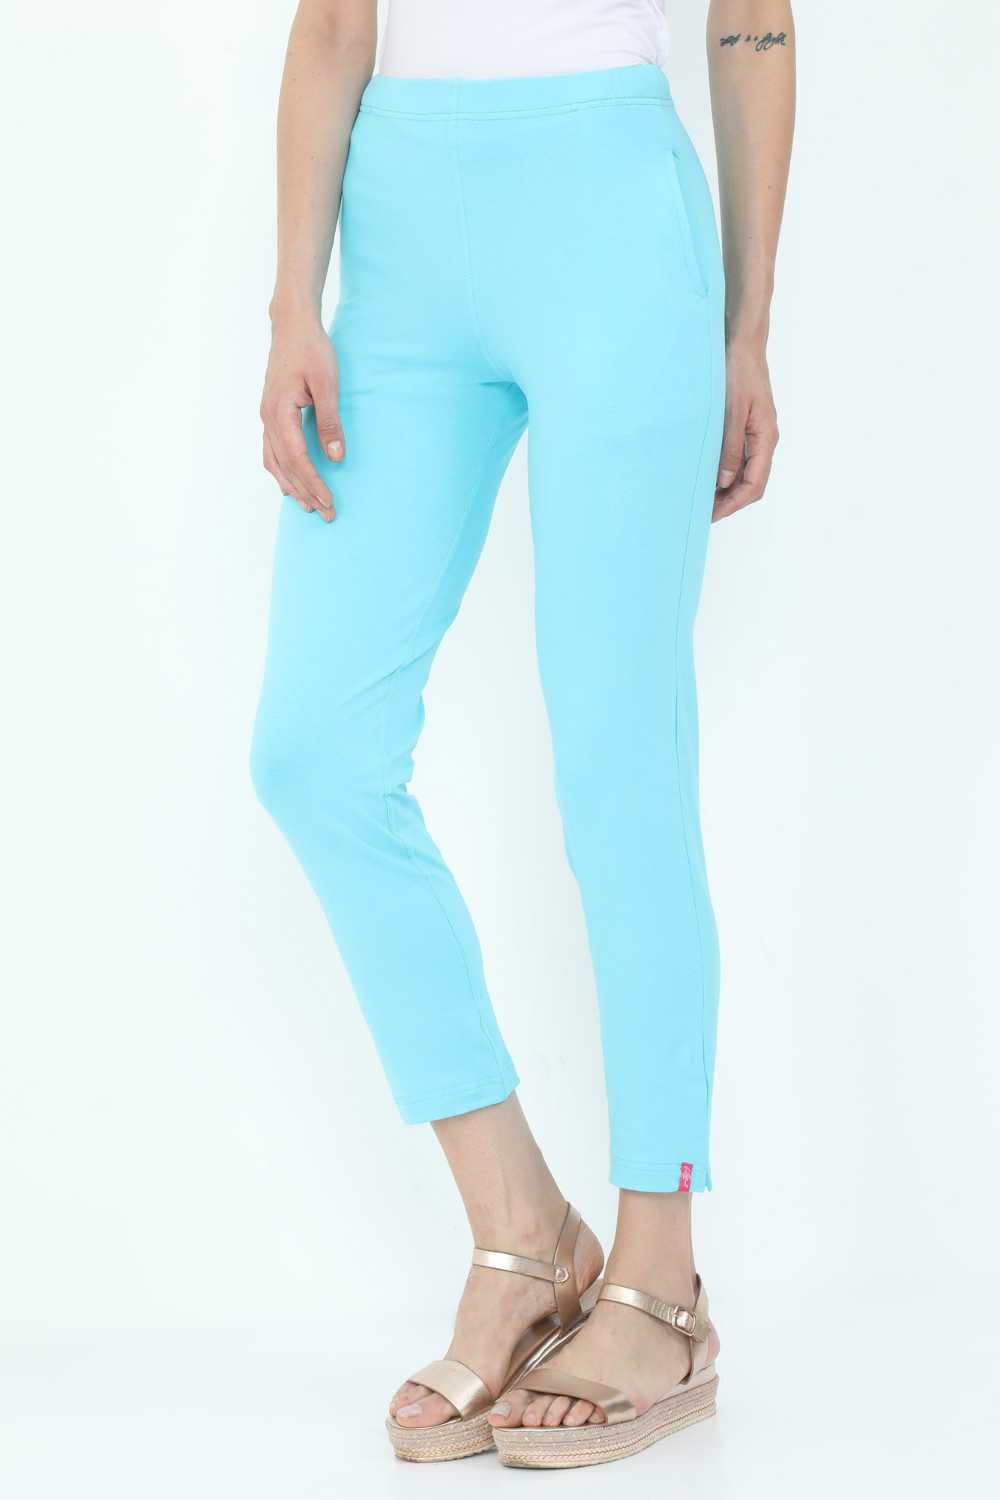 Buy Blue Trousers  Pants for Women by MARIE CLAIRE Online  Ajiocom